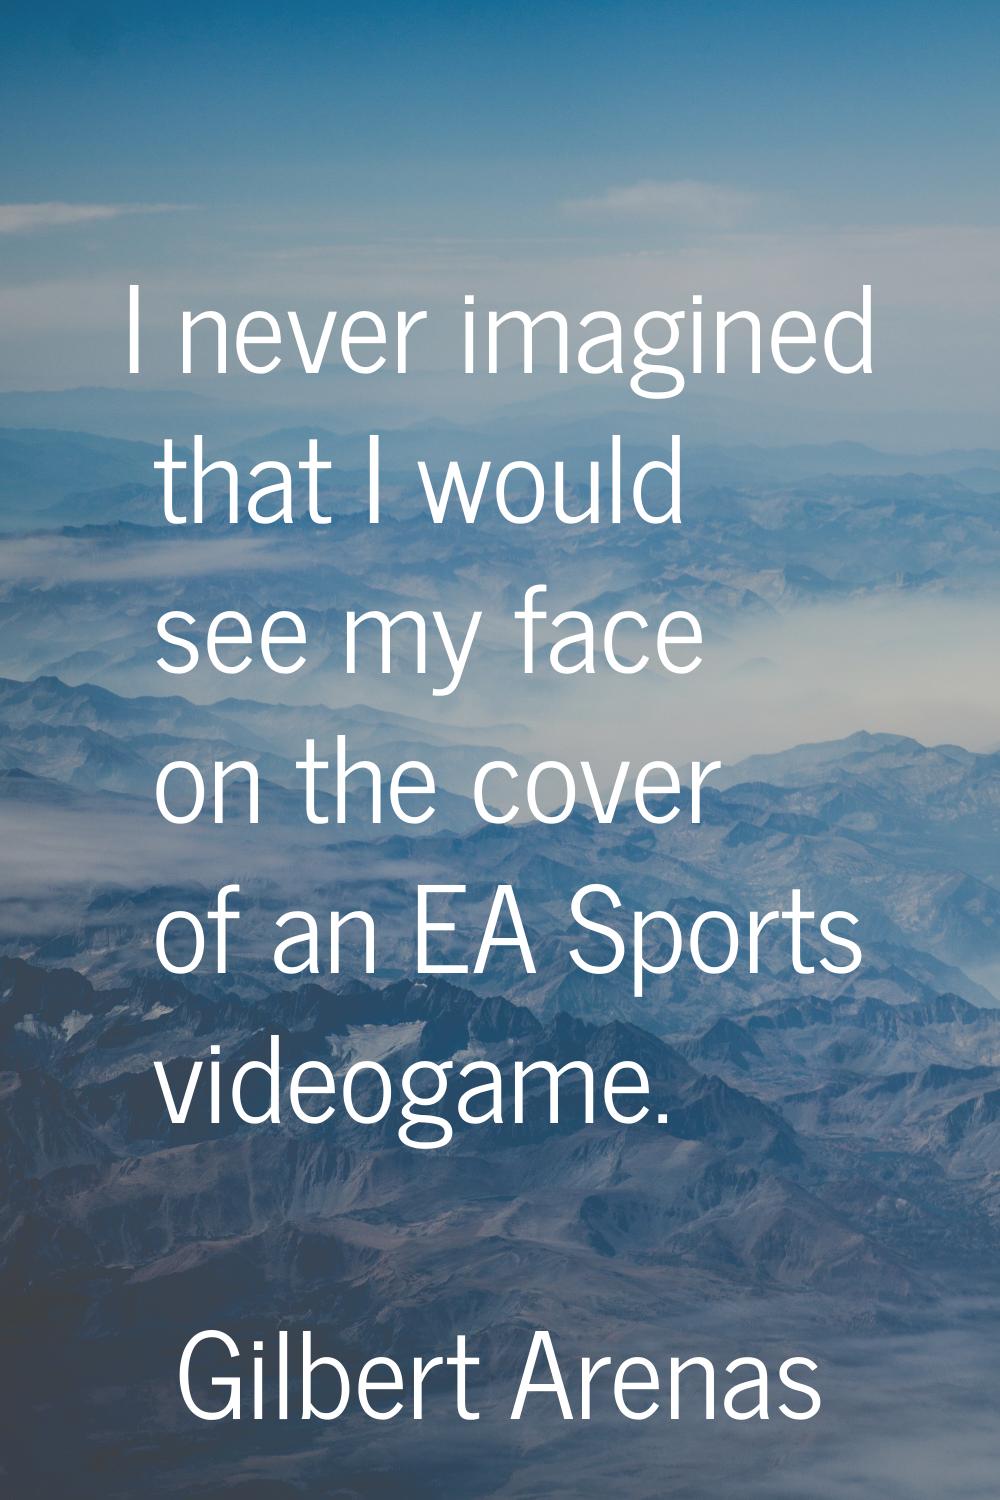 I never imagined that I would see my face on the cover of an EA Sports videogame.